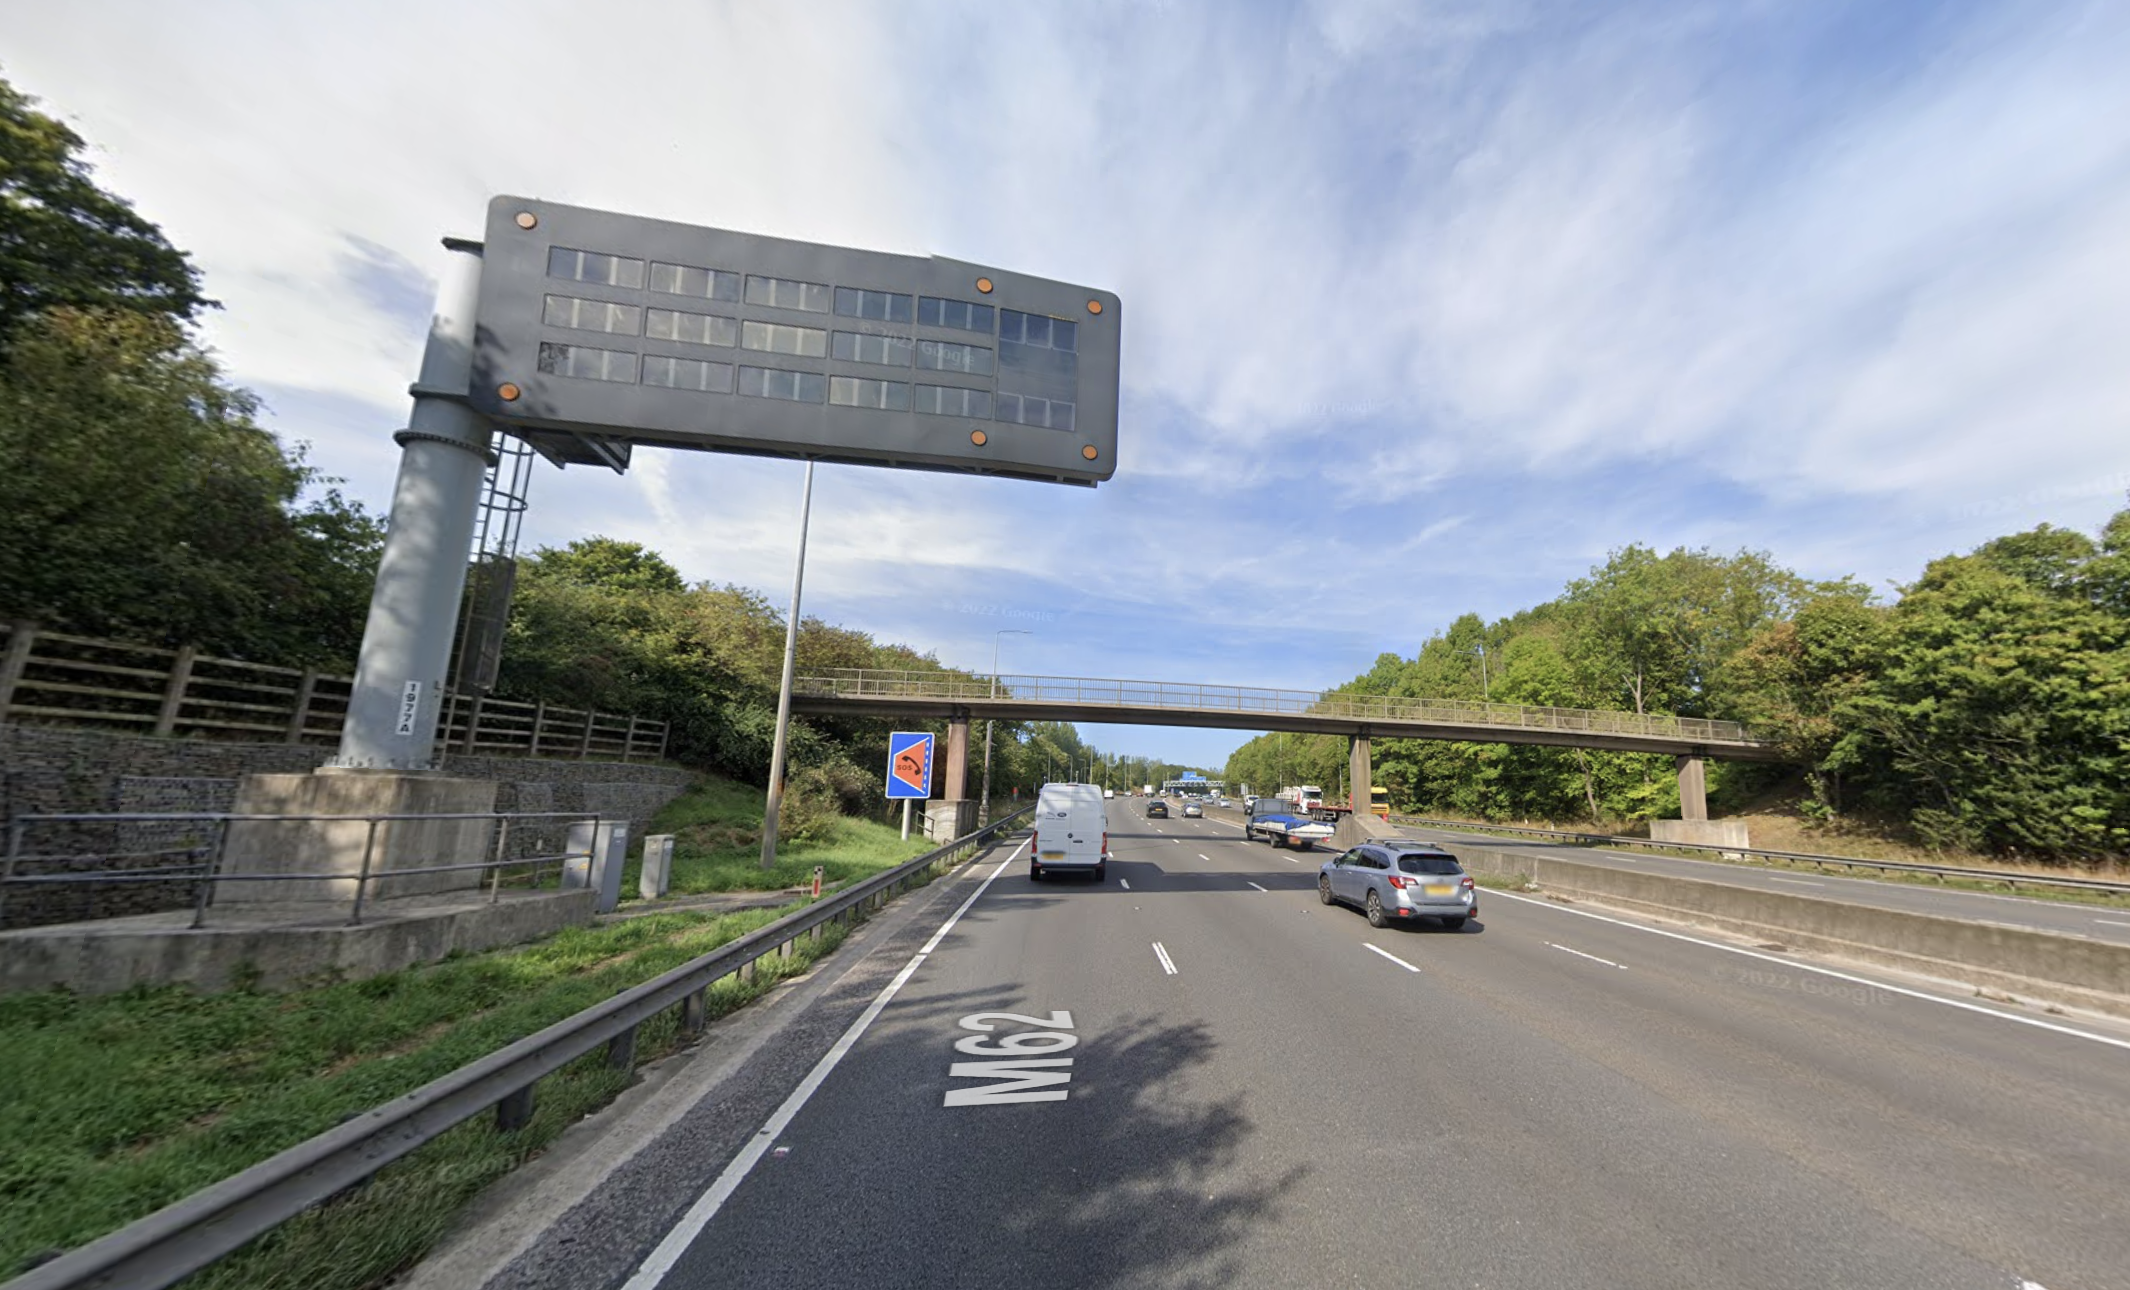 A 12-year-old boy has died in a hit and run on the M62